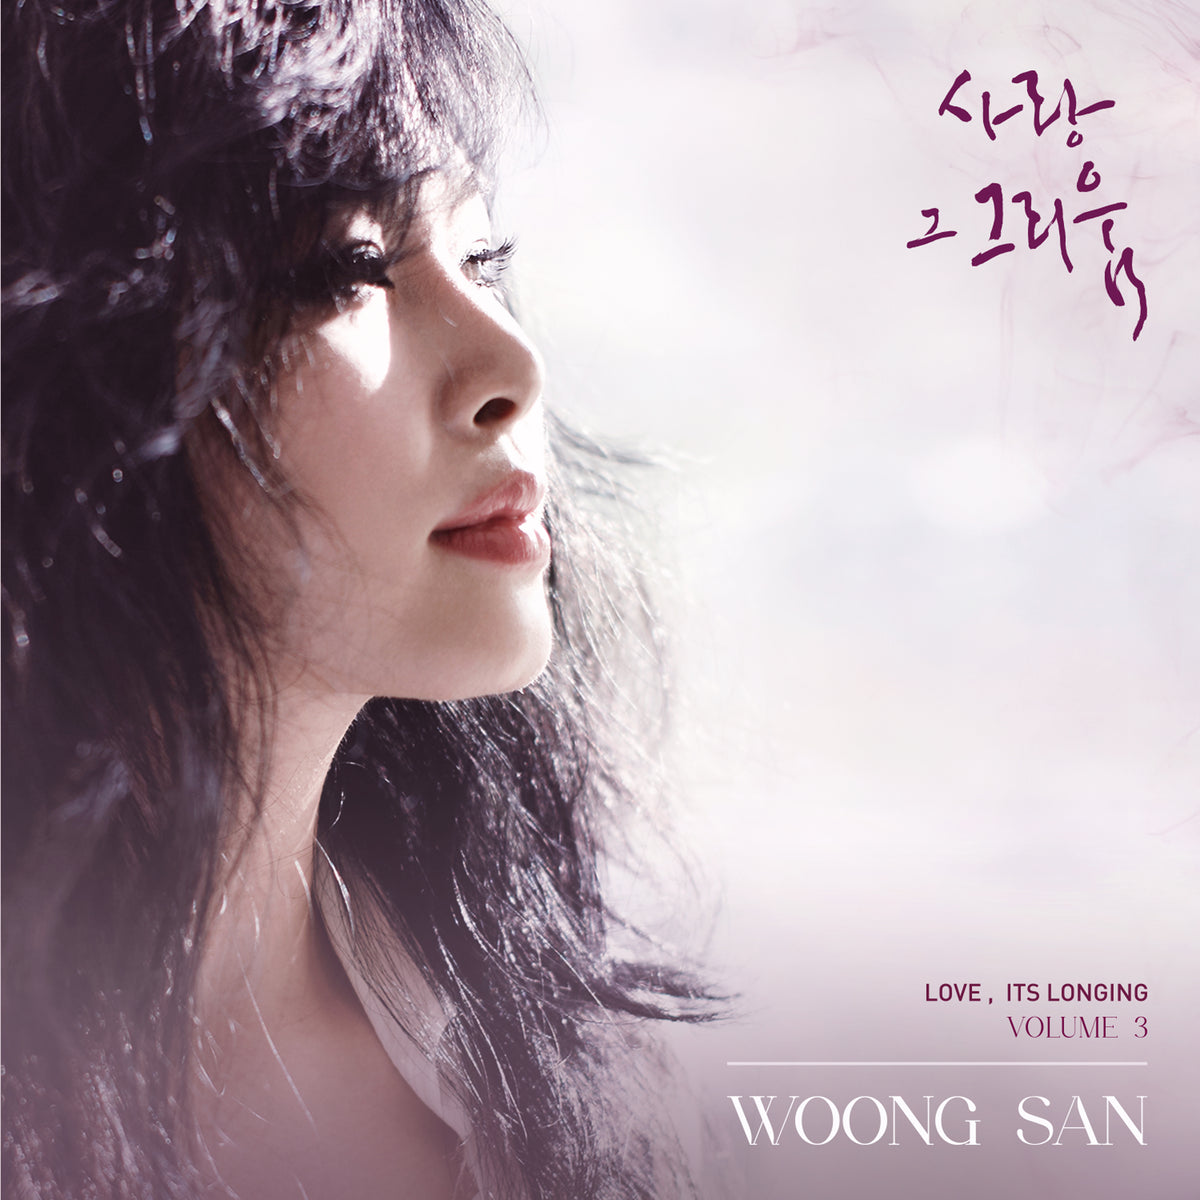 WOONG SAN - LOVE, ITS LONGING VOLUME 3